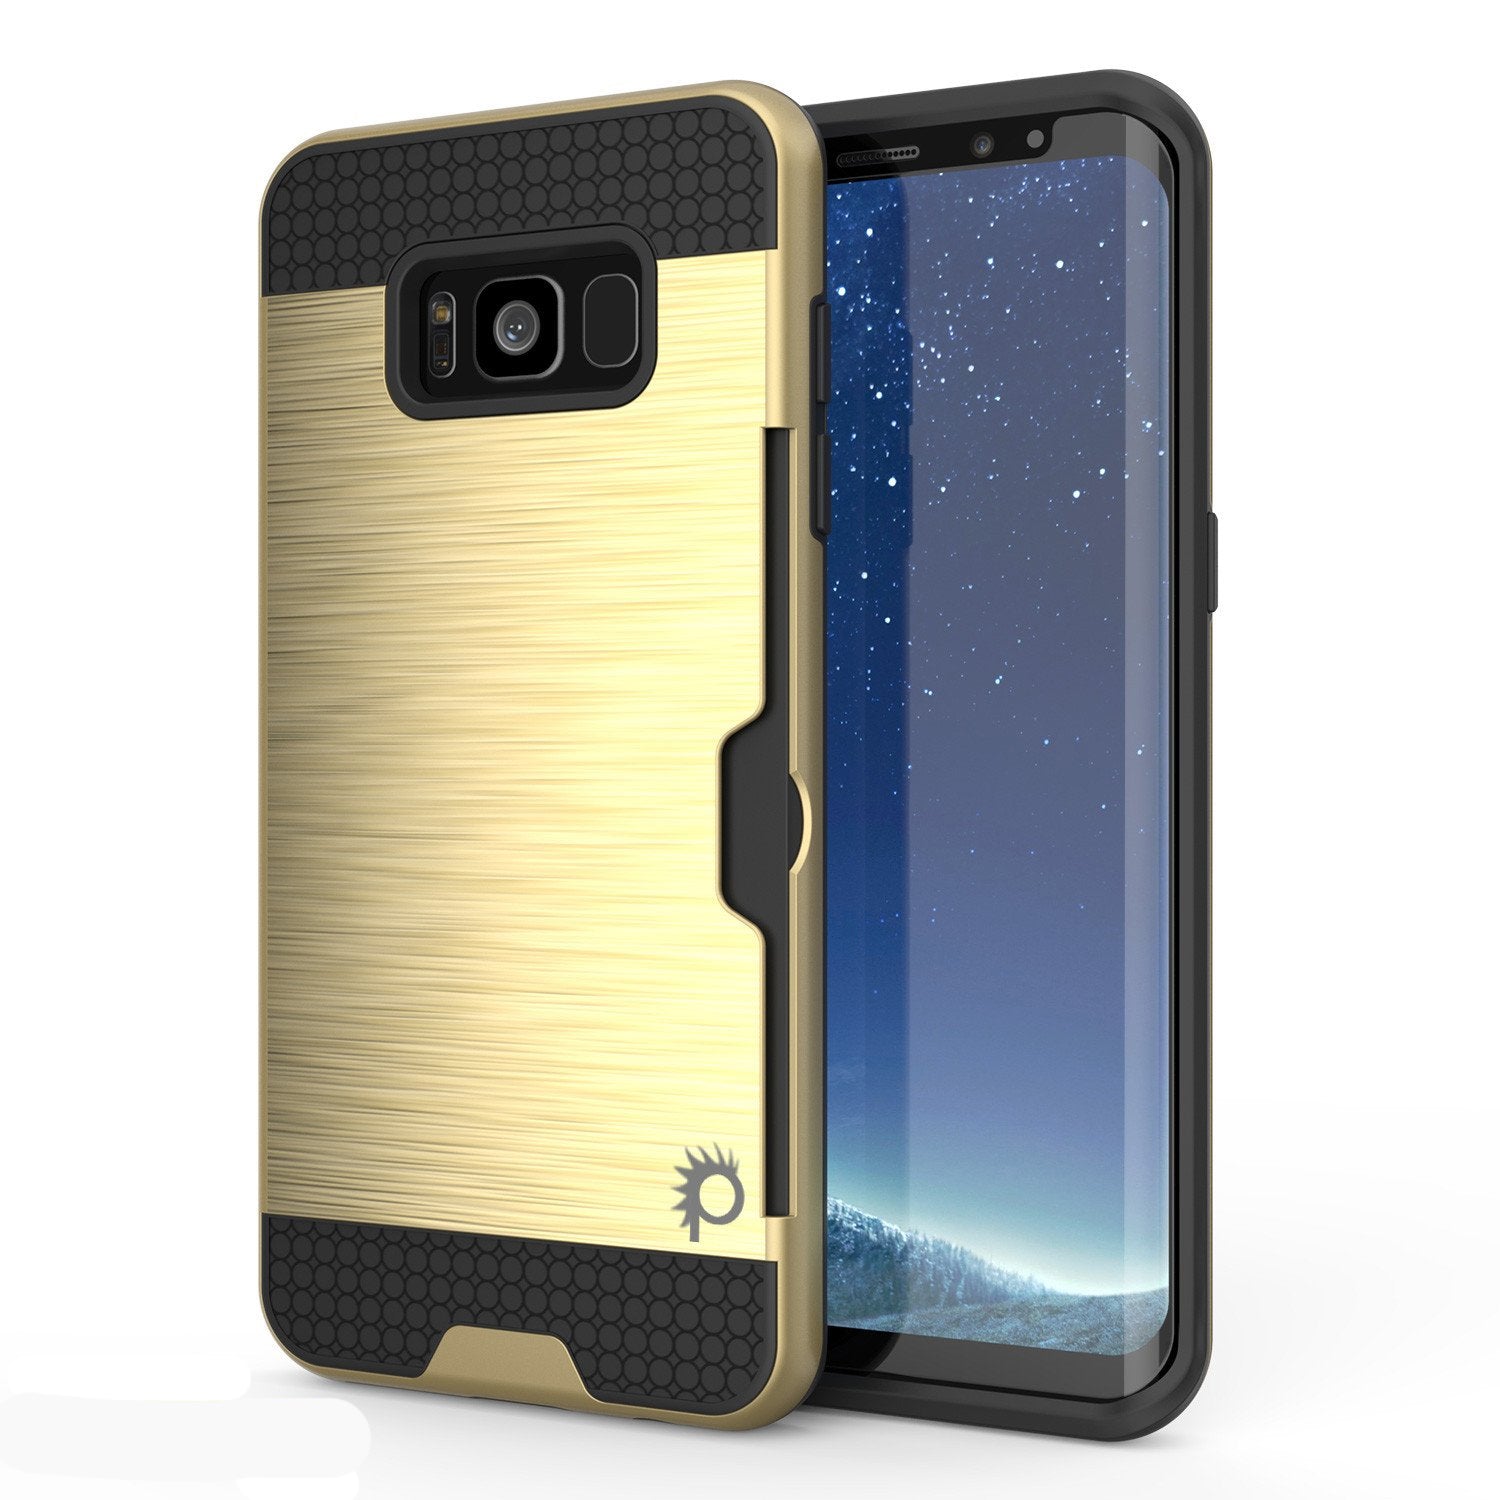 Galaxy S8 Case, PUNKcase [SLOT Series] Dual-Layer Armor Cover w/Integrated Anti-Shock System, Credit Card Slot & Screen Protector [Gold]